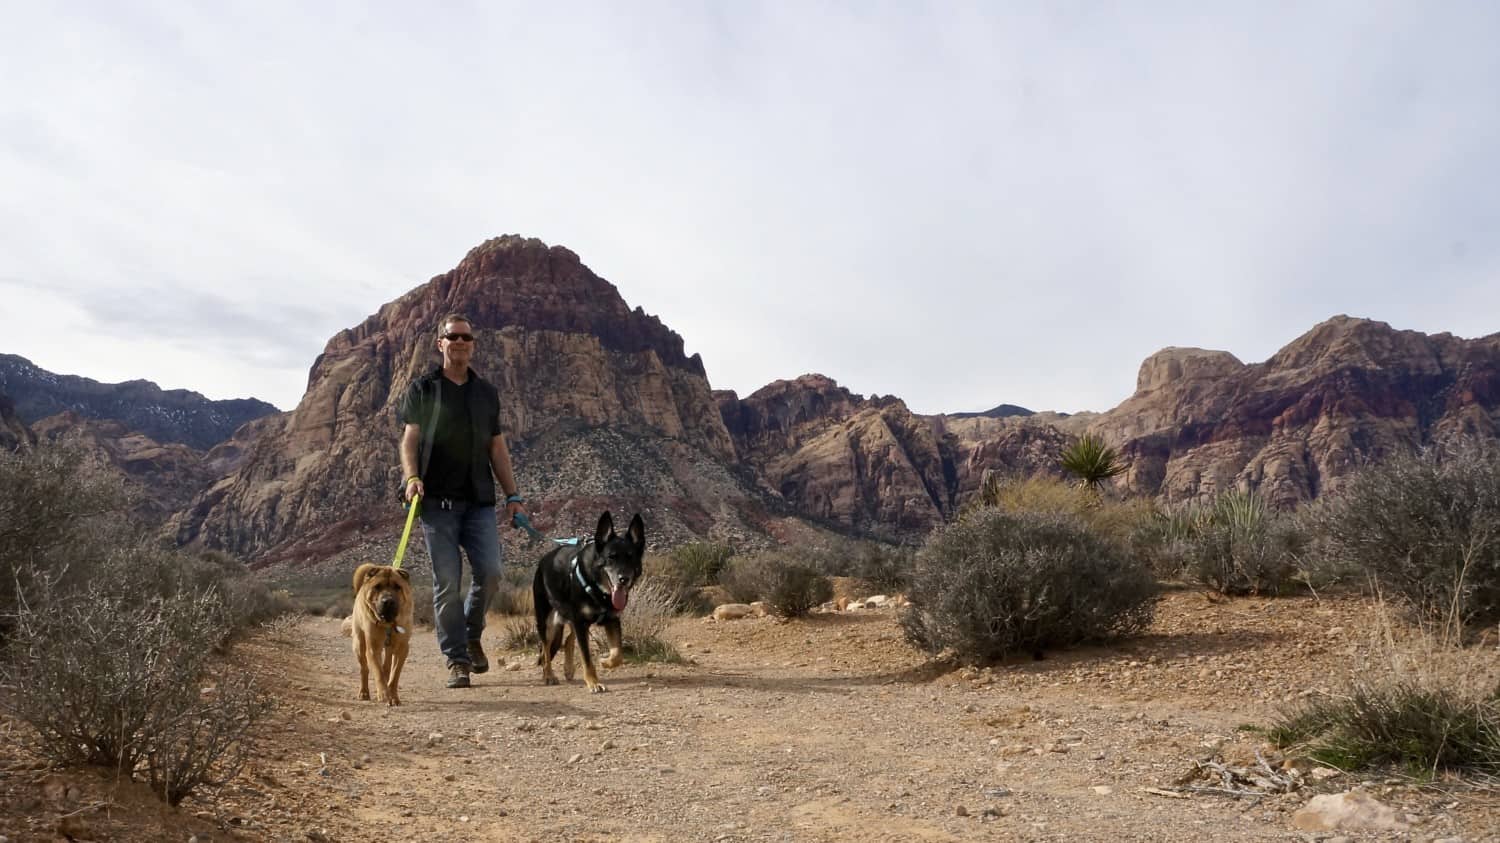 Nevada's Top Pet Friendly Attraction: Red Rock Canyon | GoPetFriendly.com